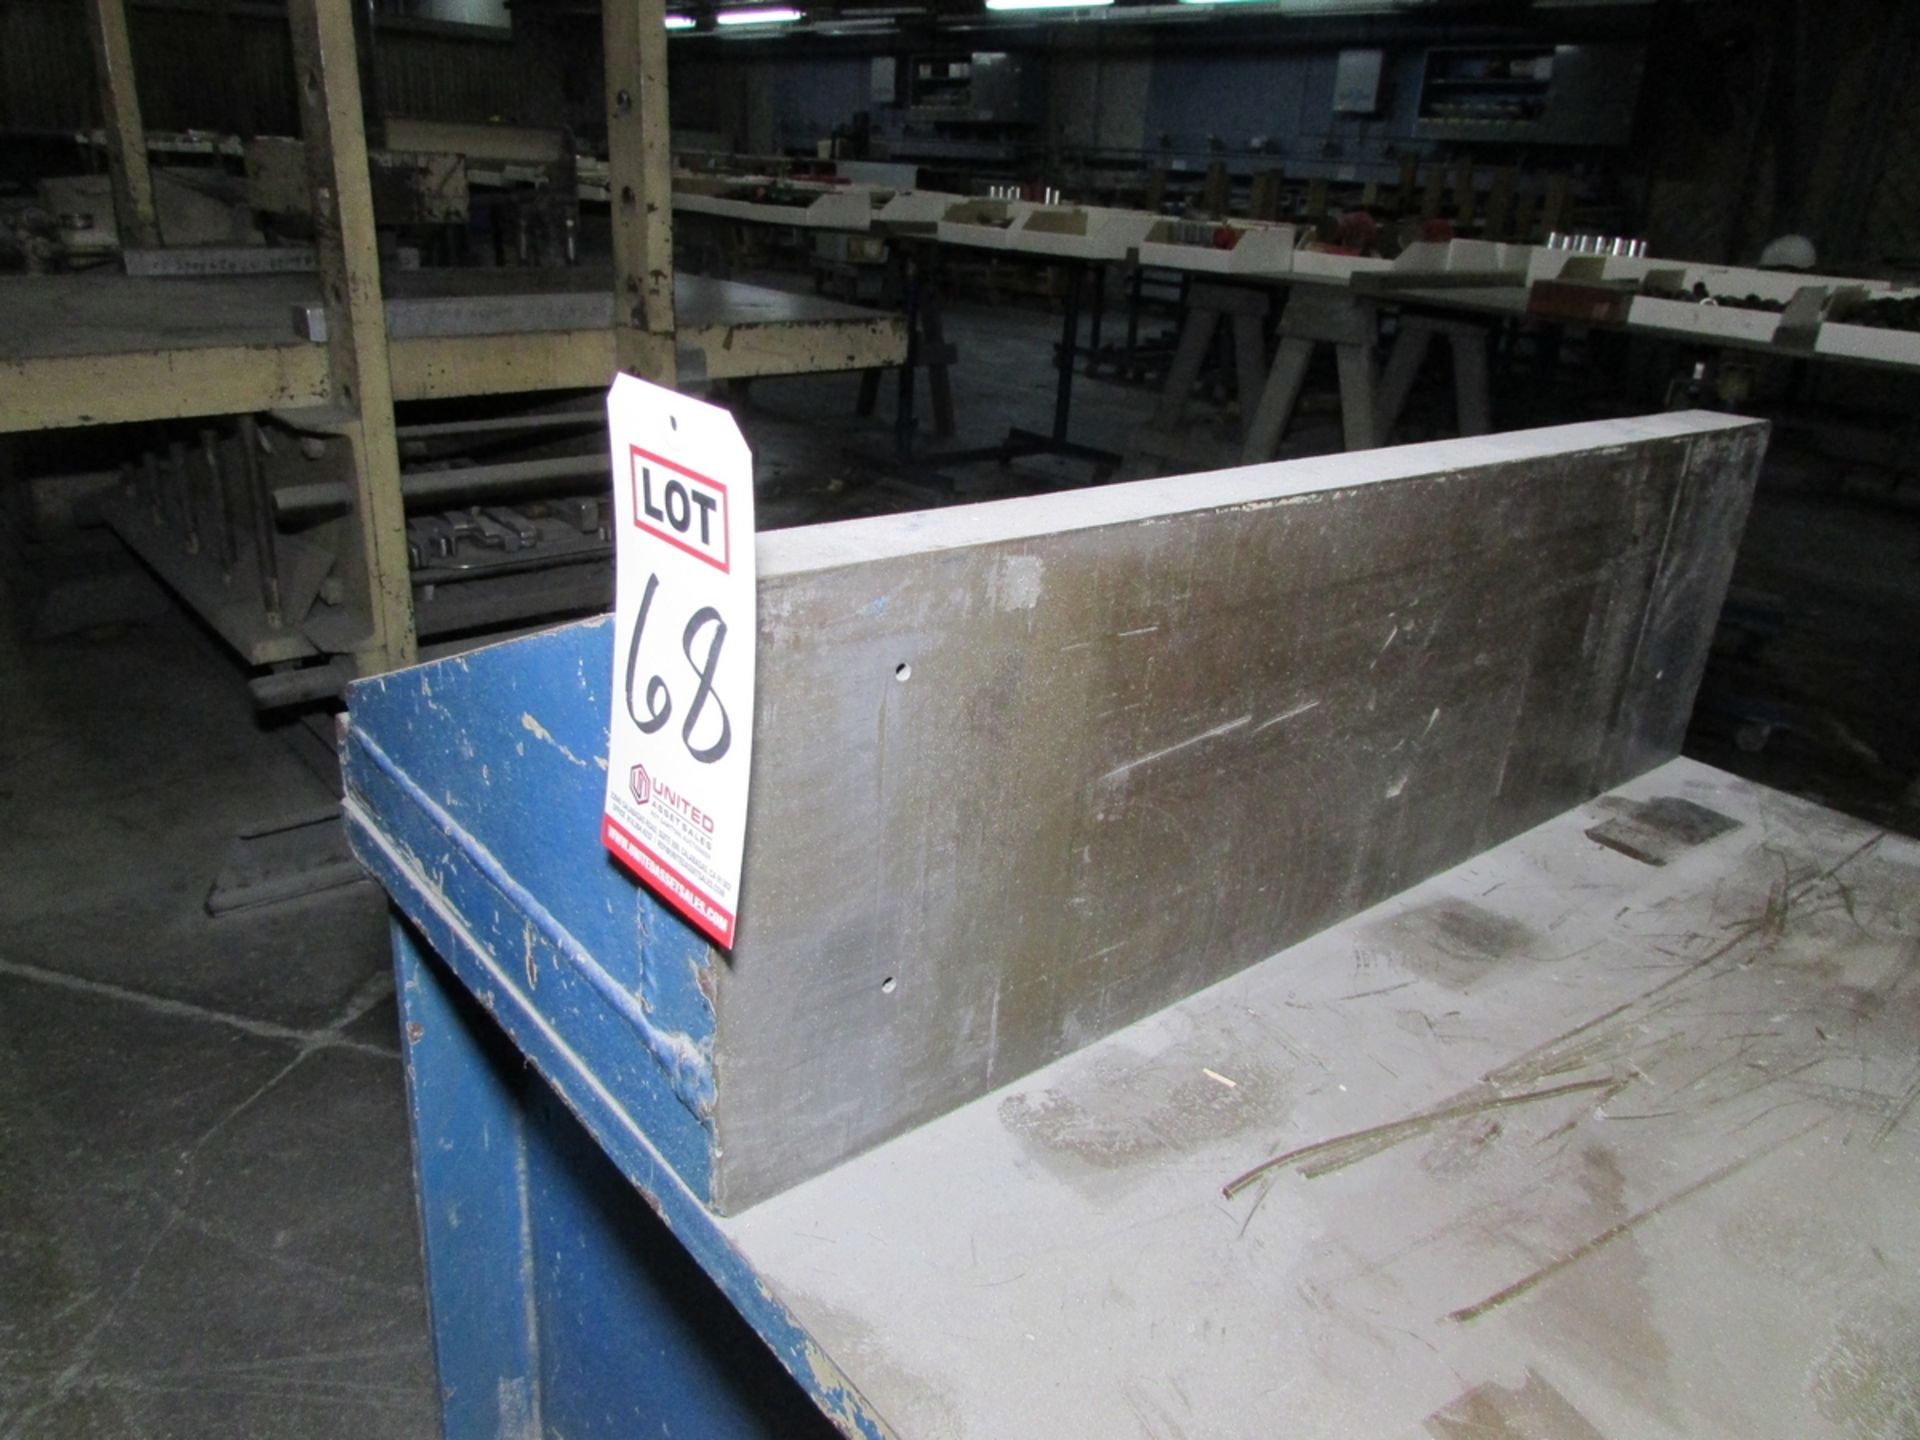 HORIZONTAL HYDRAULIC STRAIGHTENING PRESS, 30" X 9" ANGLE PLATE, 80" X 30" TABLE, ENERPAC GPER5320J - Image 3 of 12